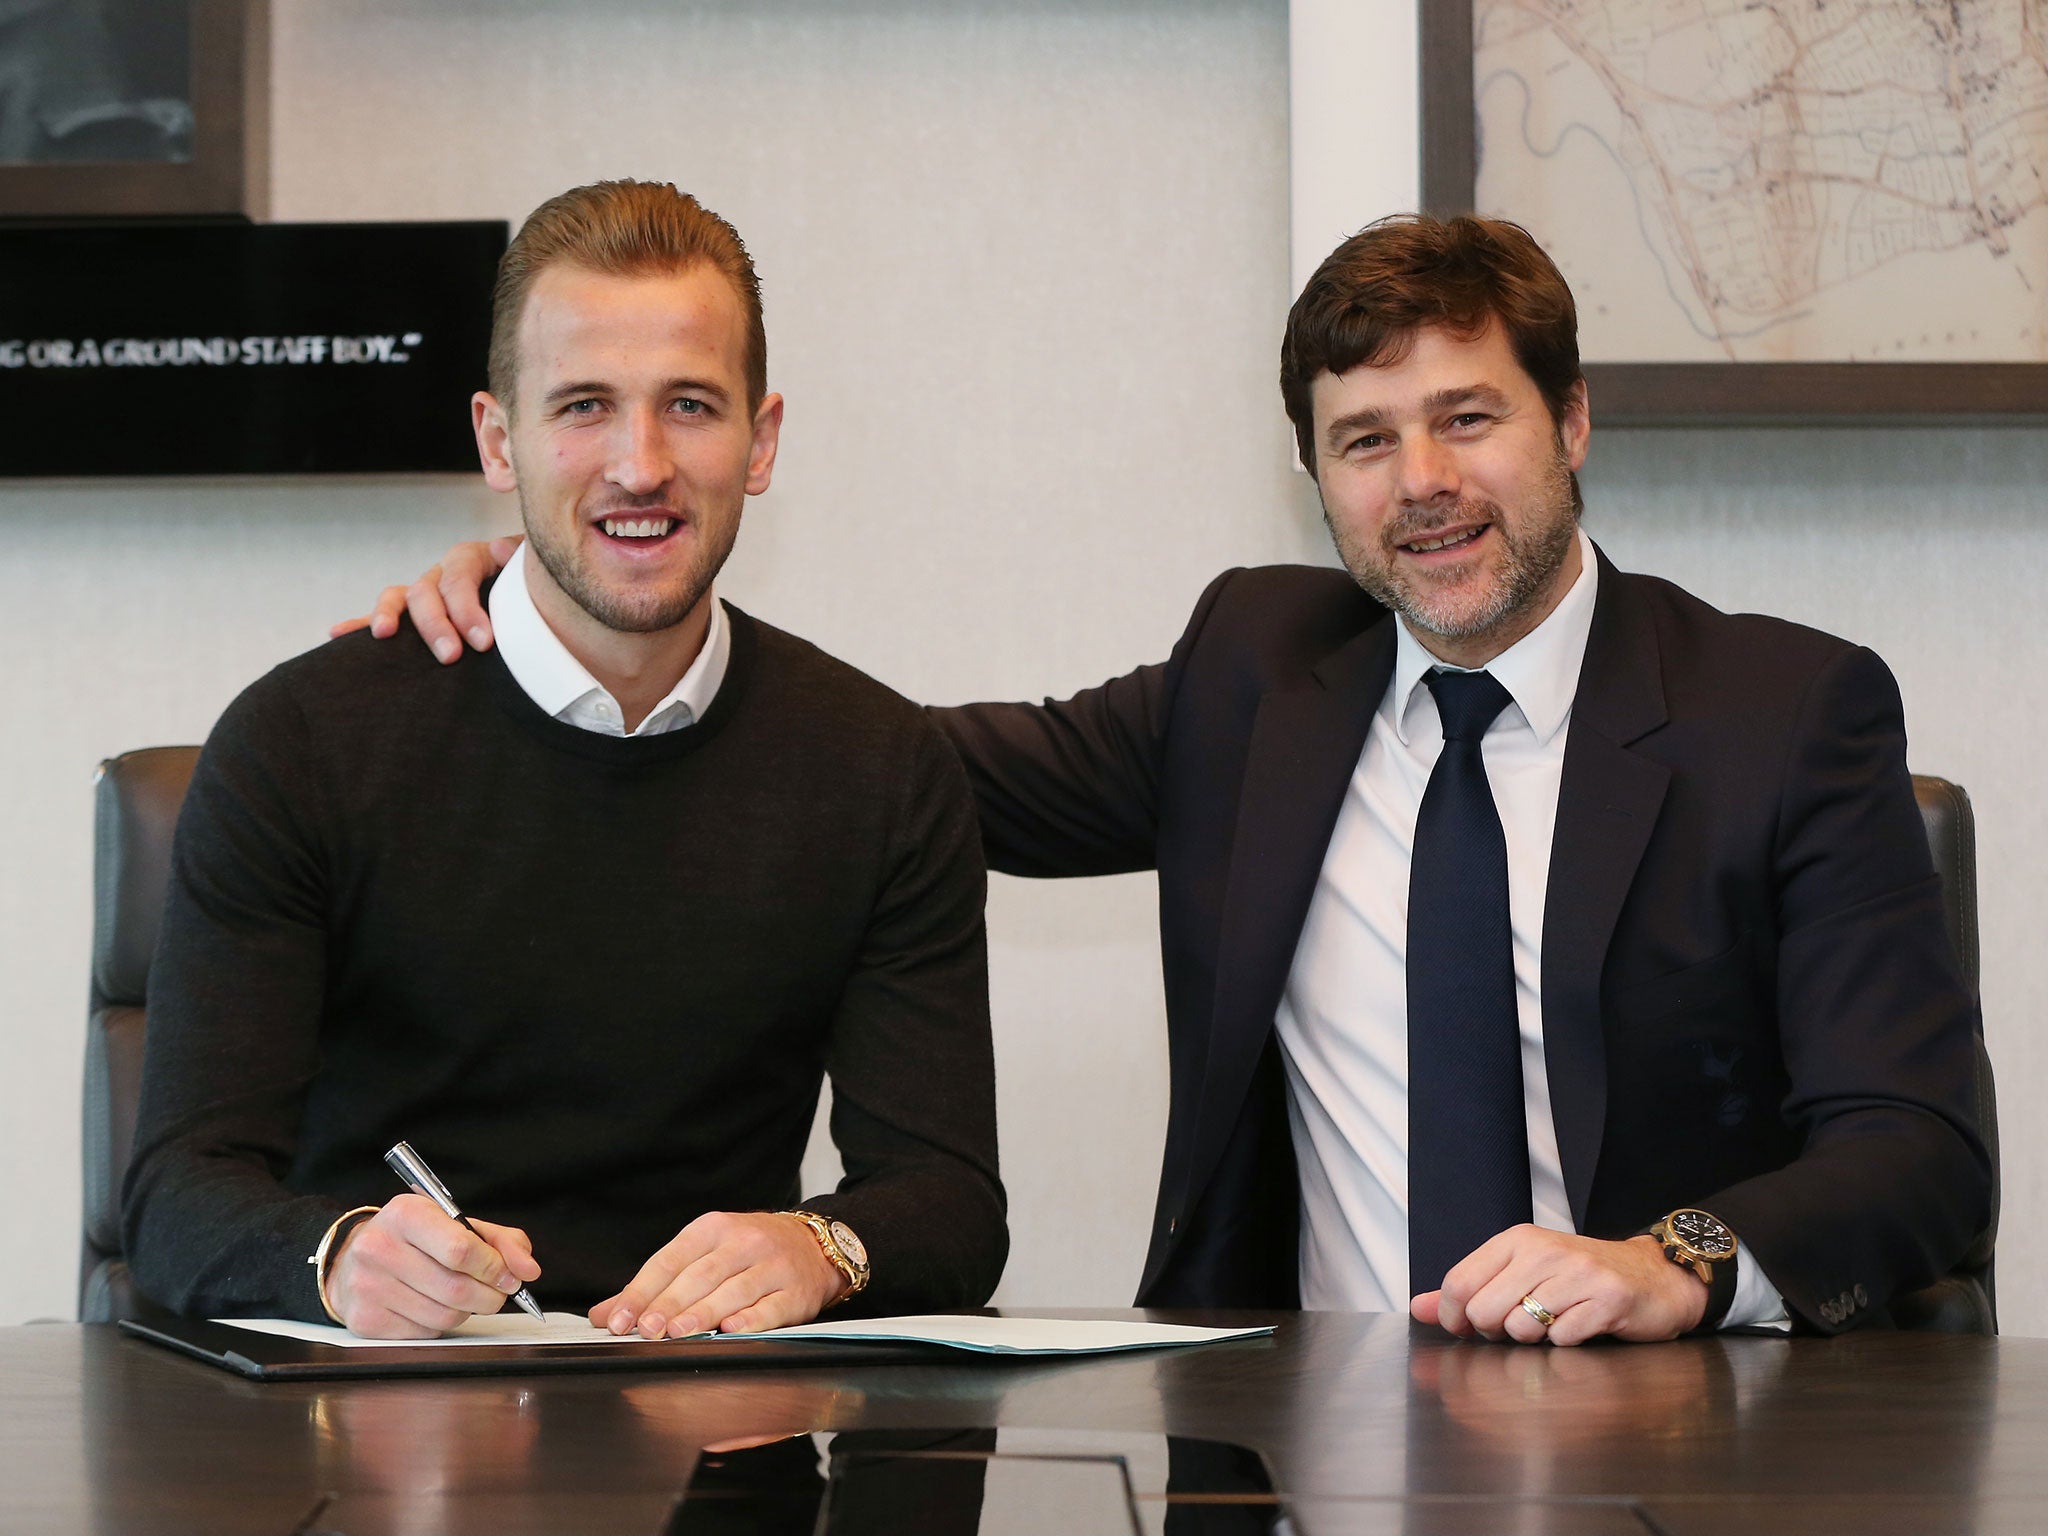 Kane was one of many young players to sign a new contract with Spurs this season